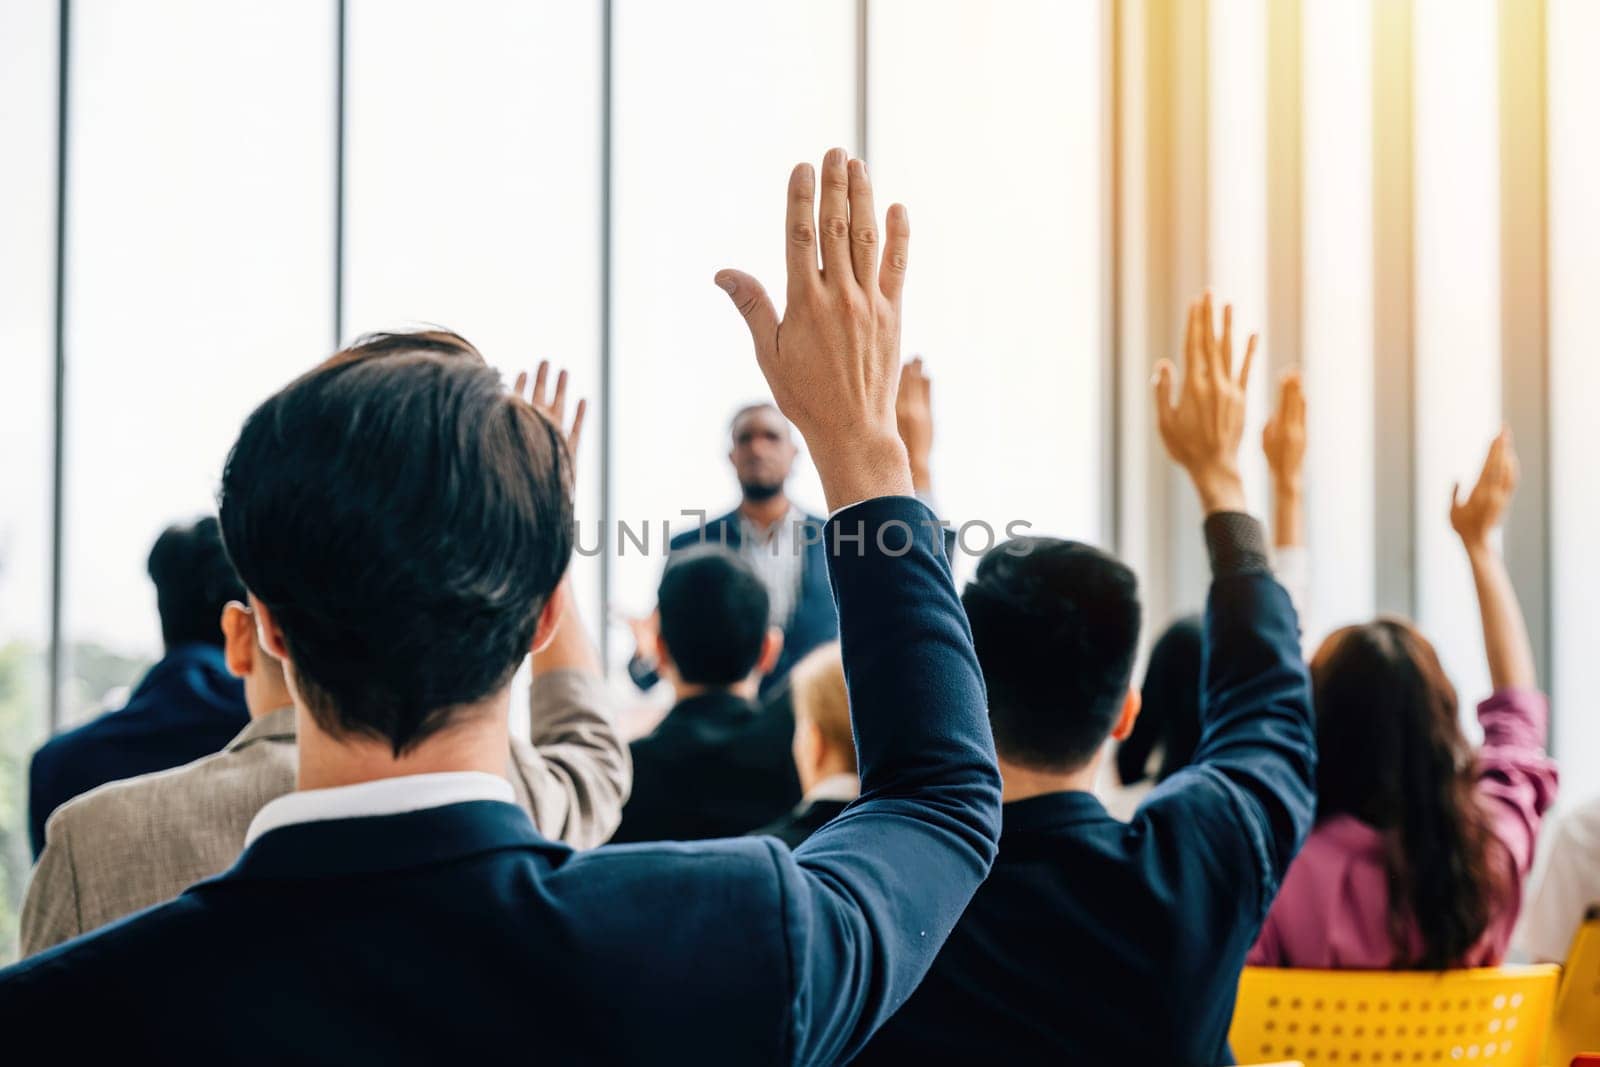 In the boardroom business professionals meet for a strategy session. The meeting and seminar feature raised hands as questions are posed by colleagues and employees.